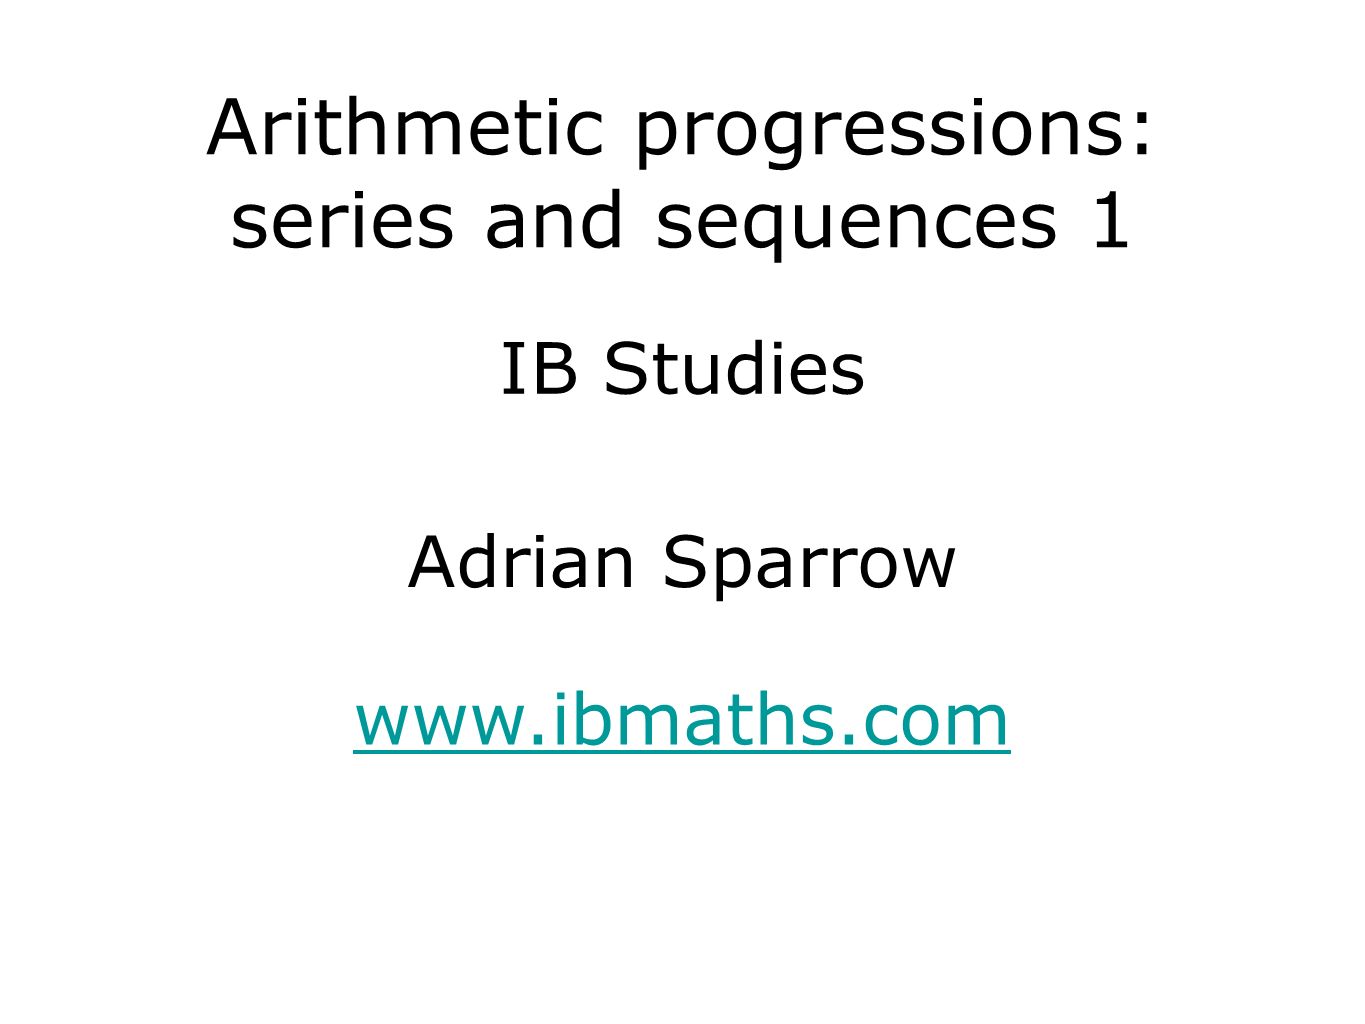 IB Studies   Adrian Sparrow Arithmetic progressions: series and sequences 1